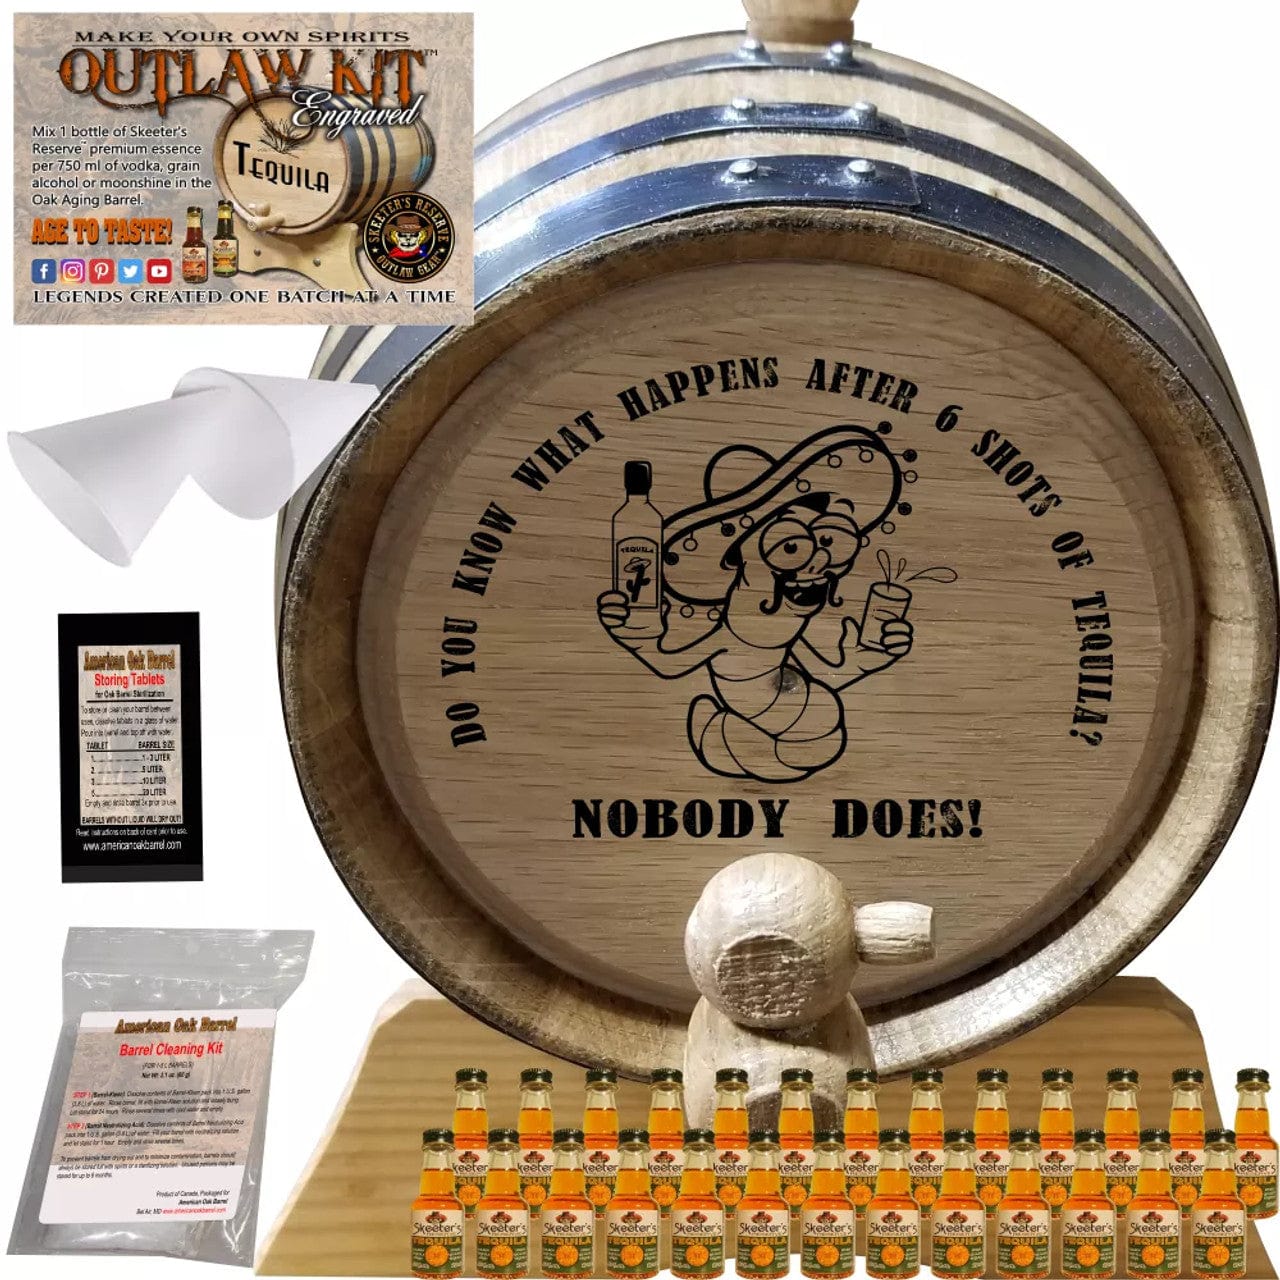 American Oak Barrel Outlaw Kits American Oak Barrel Engraved Outlaw Kit™ (086) Tequila: After 6 Shots - Create Your Own Spirits